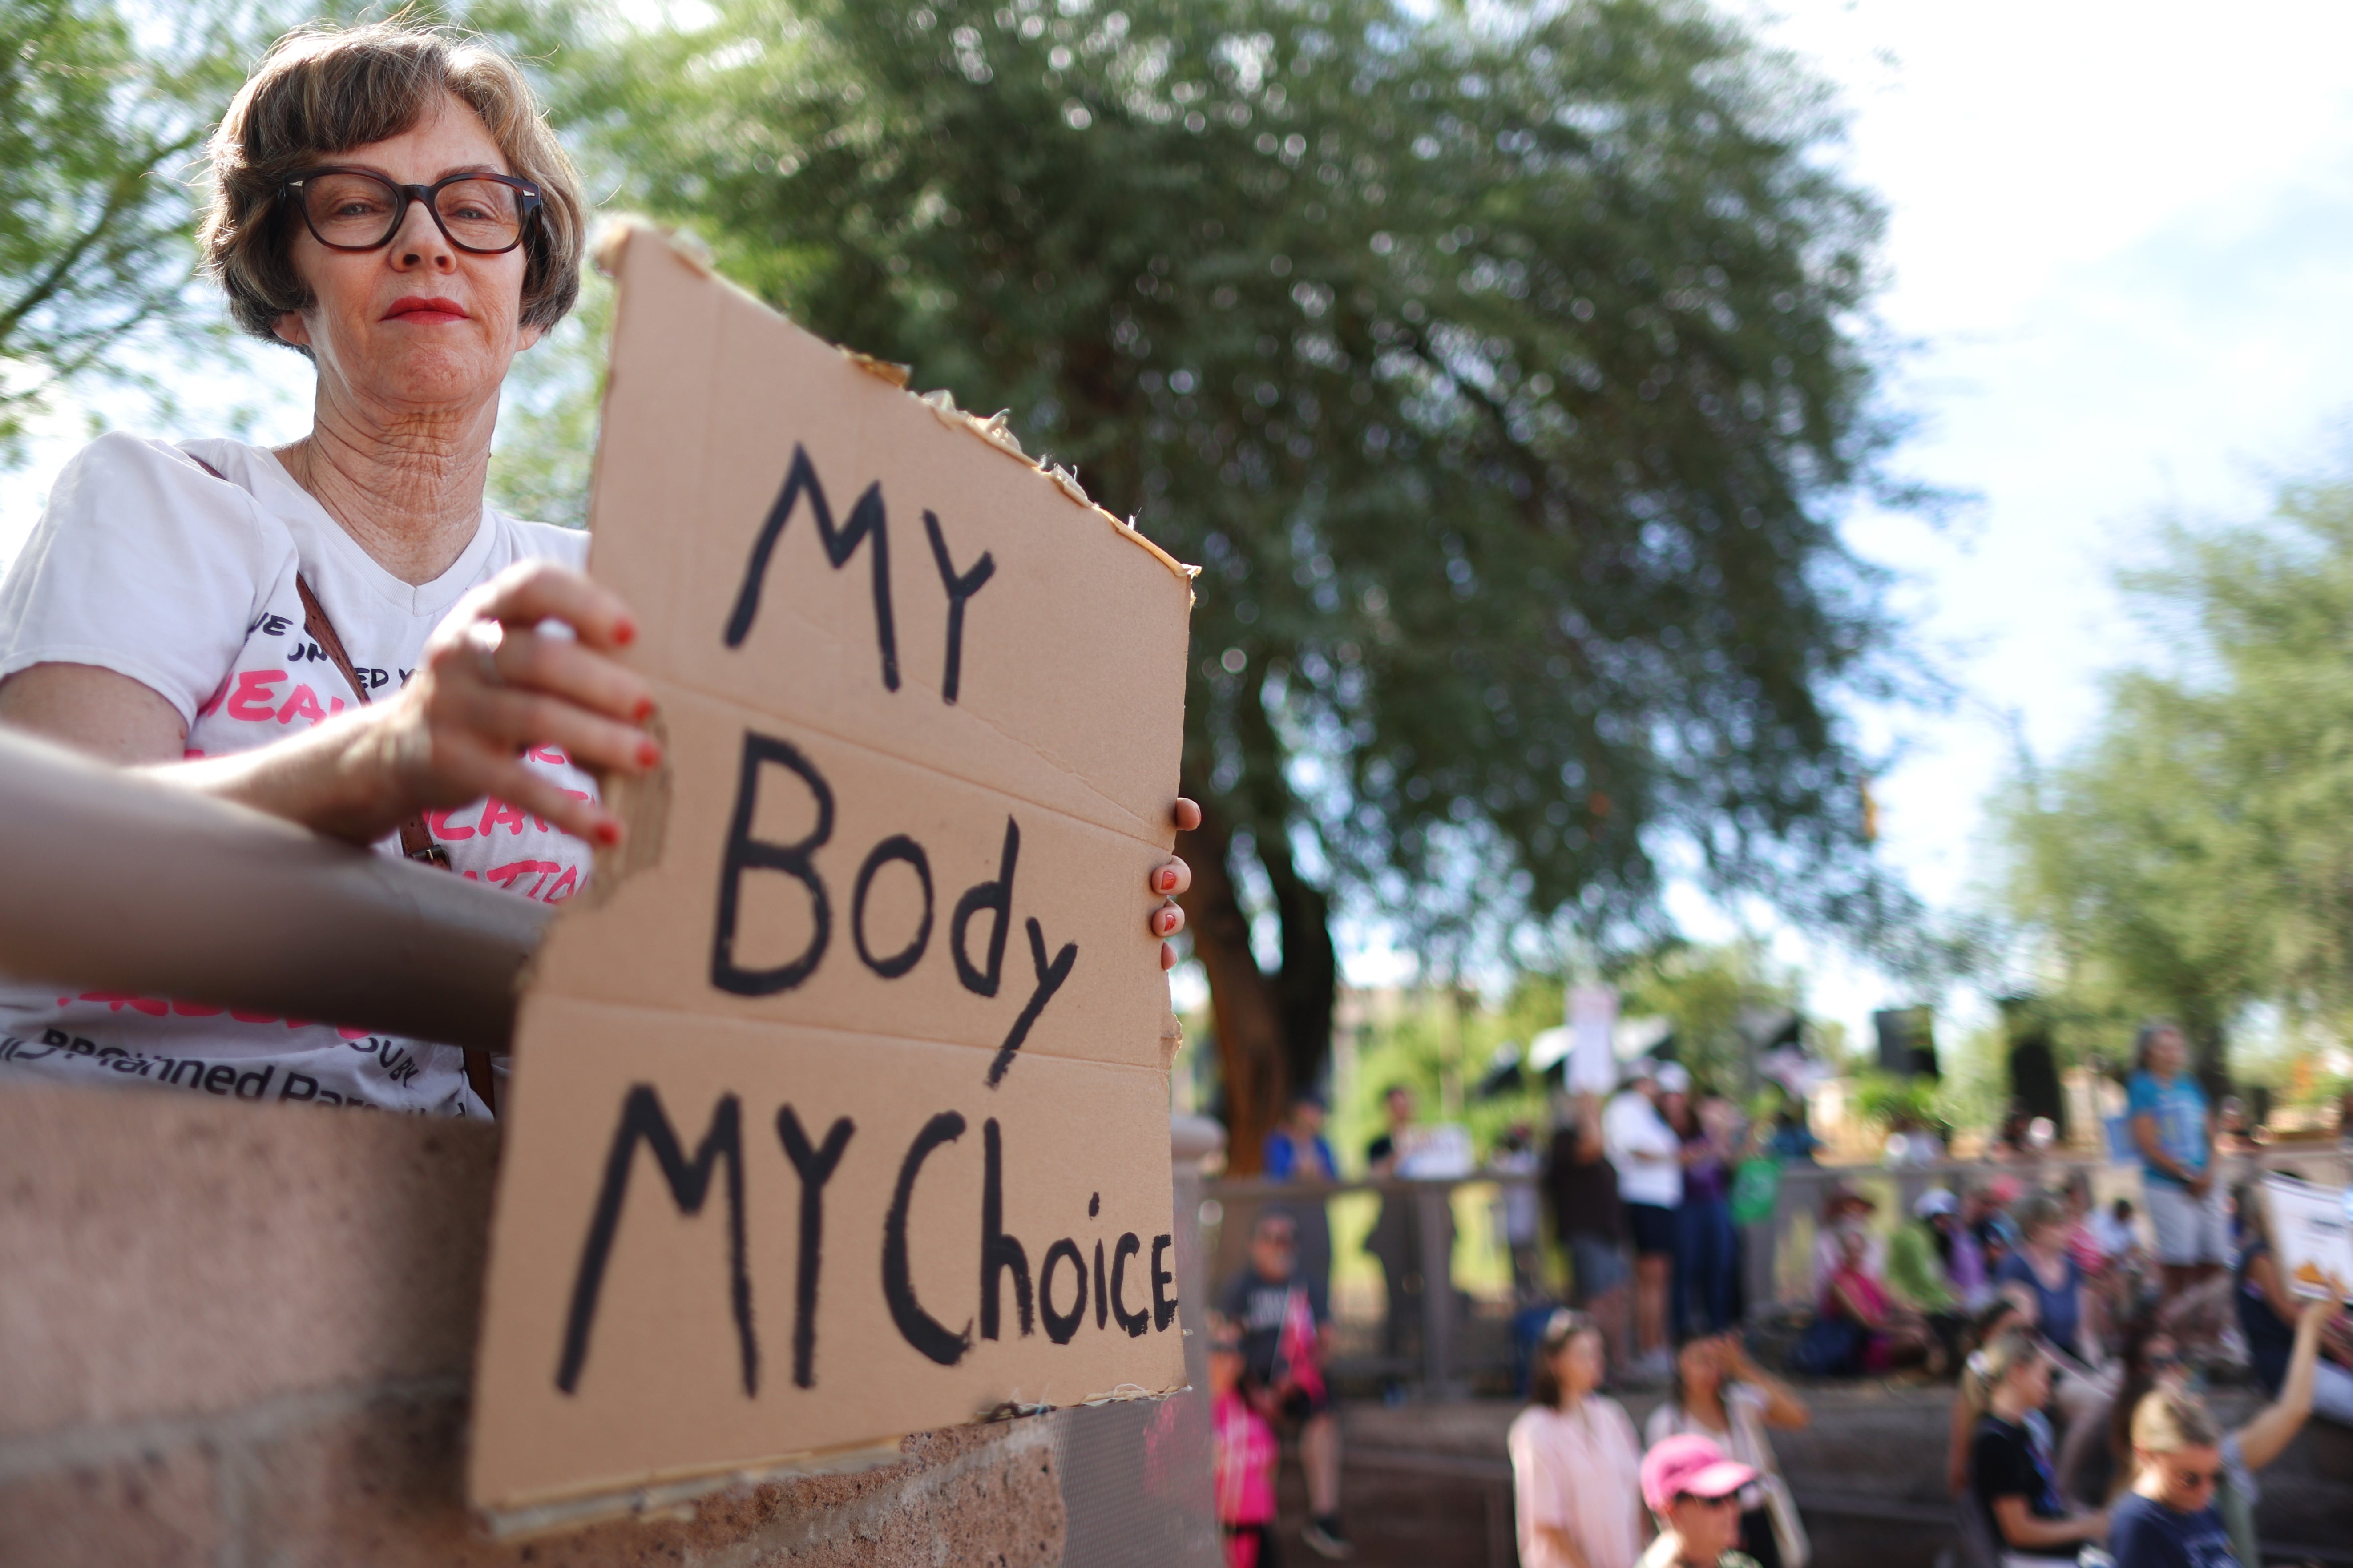 A protester holds a sign reading ‘My Body My Choice’ at a women’s march rally outside the State Capitol on 8 October 2022 in Phoenix, Arizona